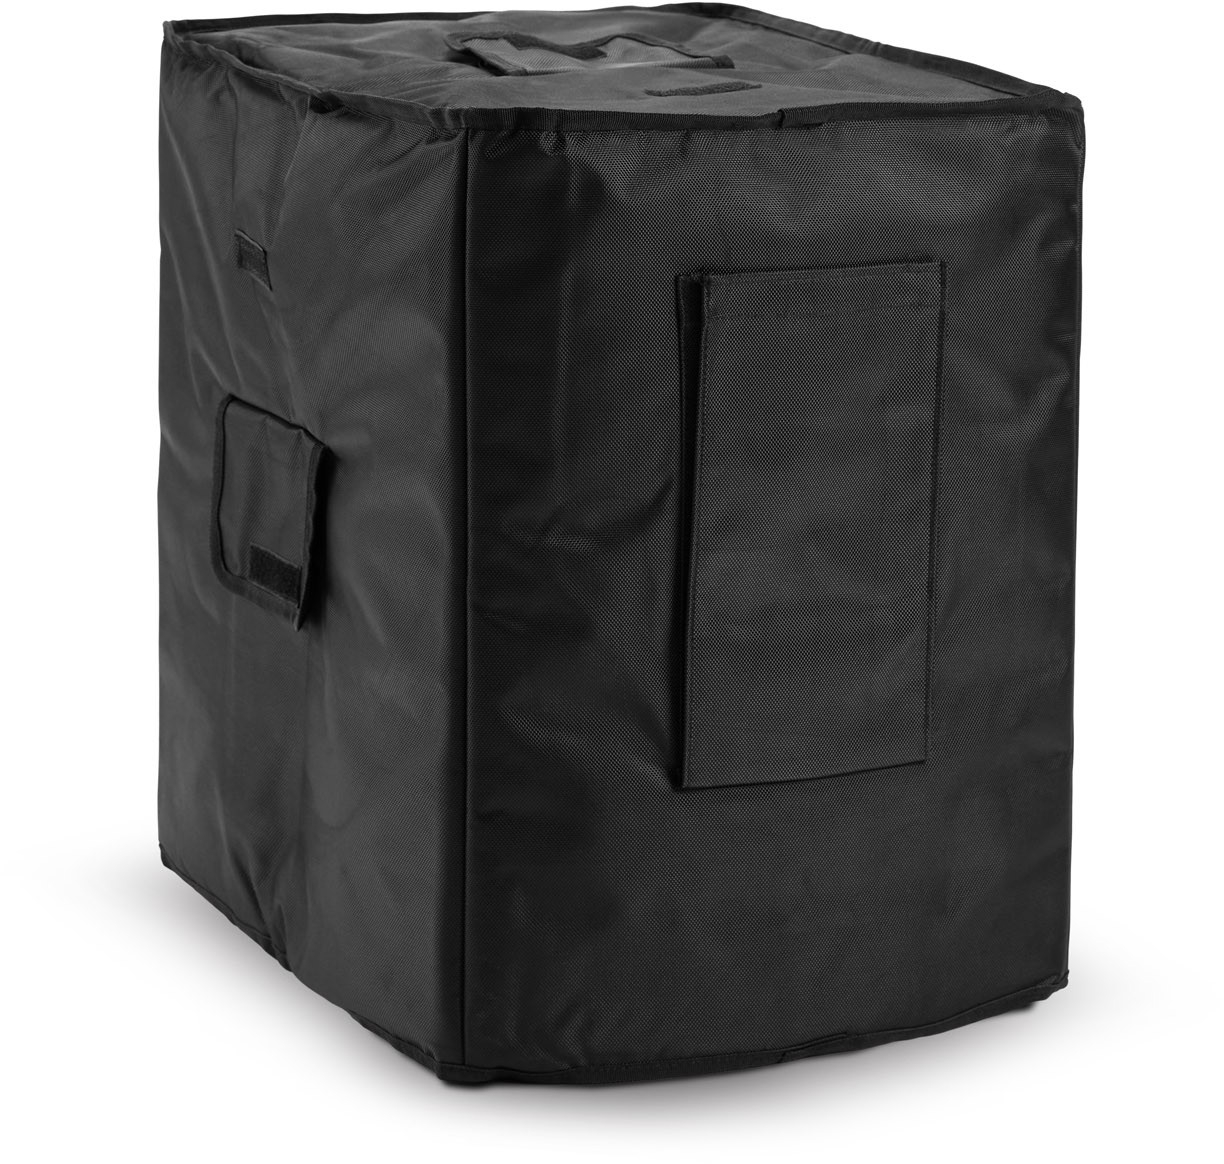 Ld Systems Maui 28 G3 Sub Pc - Bag for speakers & subwoofer - Variation 1